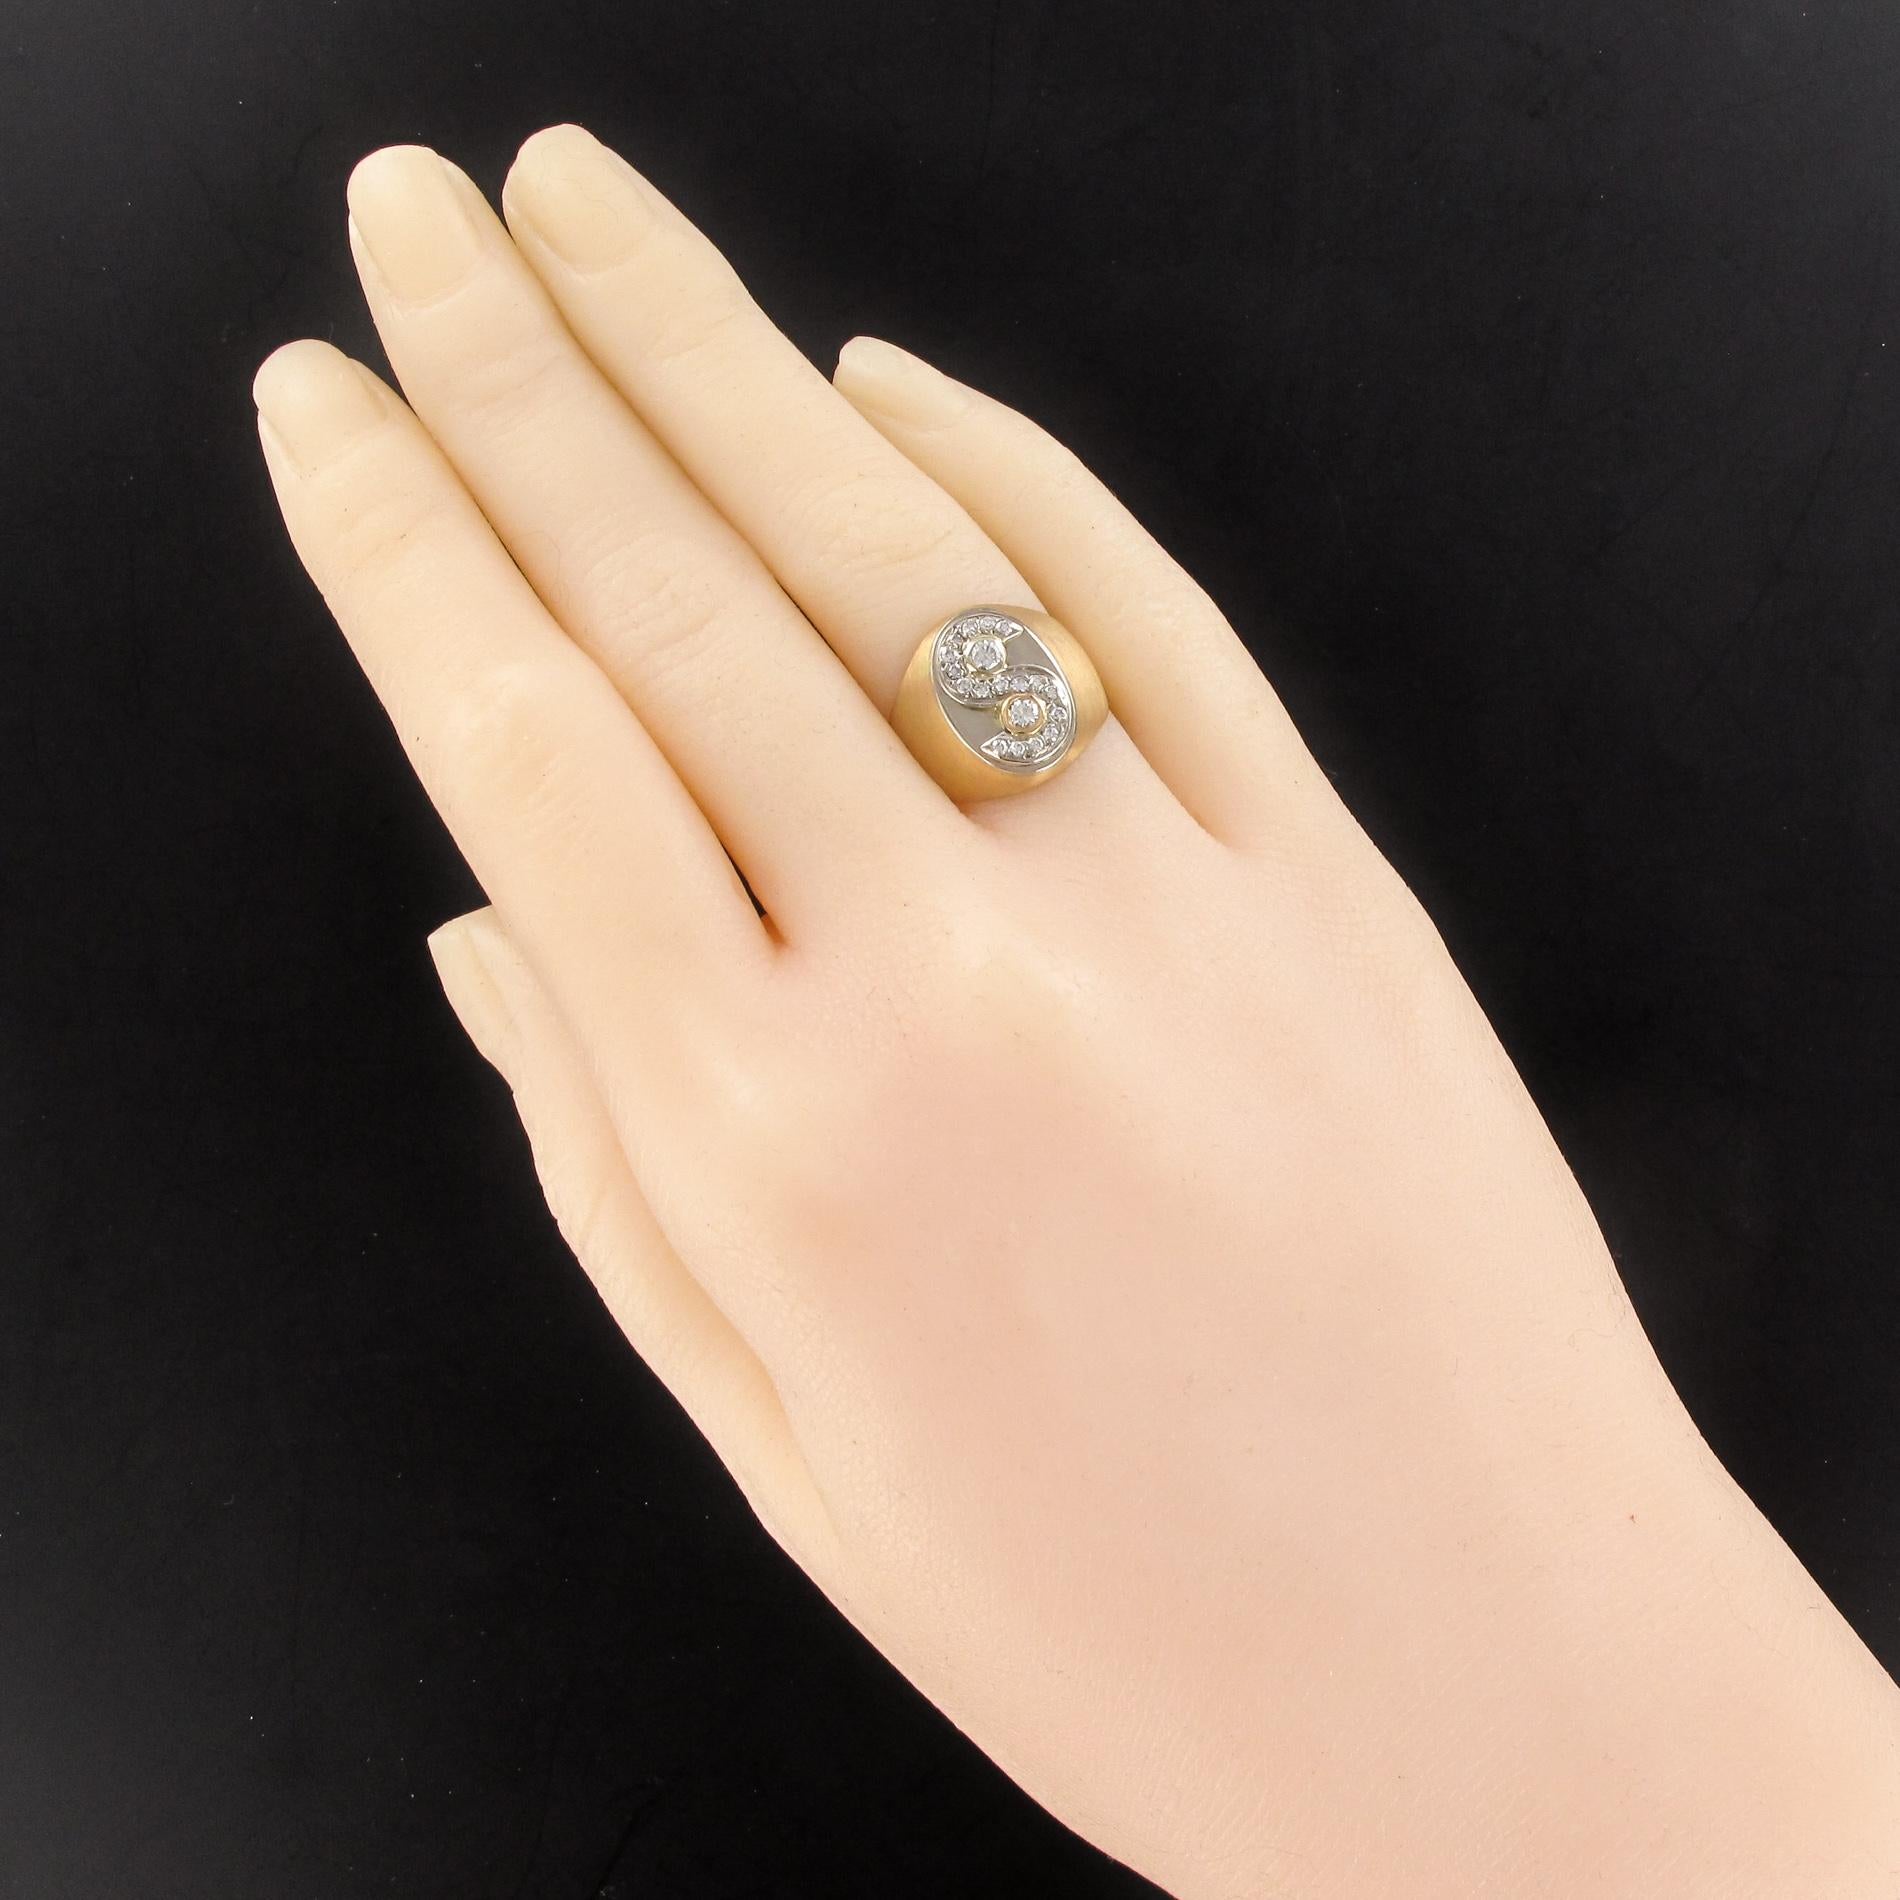 Ring in 18 karats yellow gold.
Lovely signet ring, the frame is made of brushed gold. It is set with applied on its tray of the initial S entirely set with 17 diamonds. 2 larger diamonds are closed set between the loops of the S.
Weight of 2 main